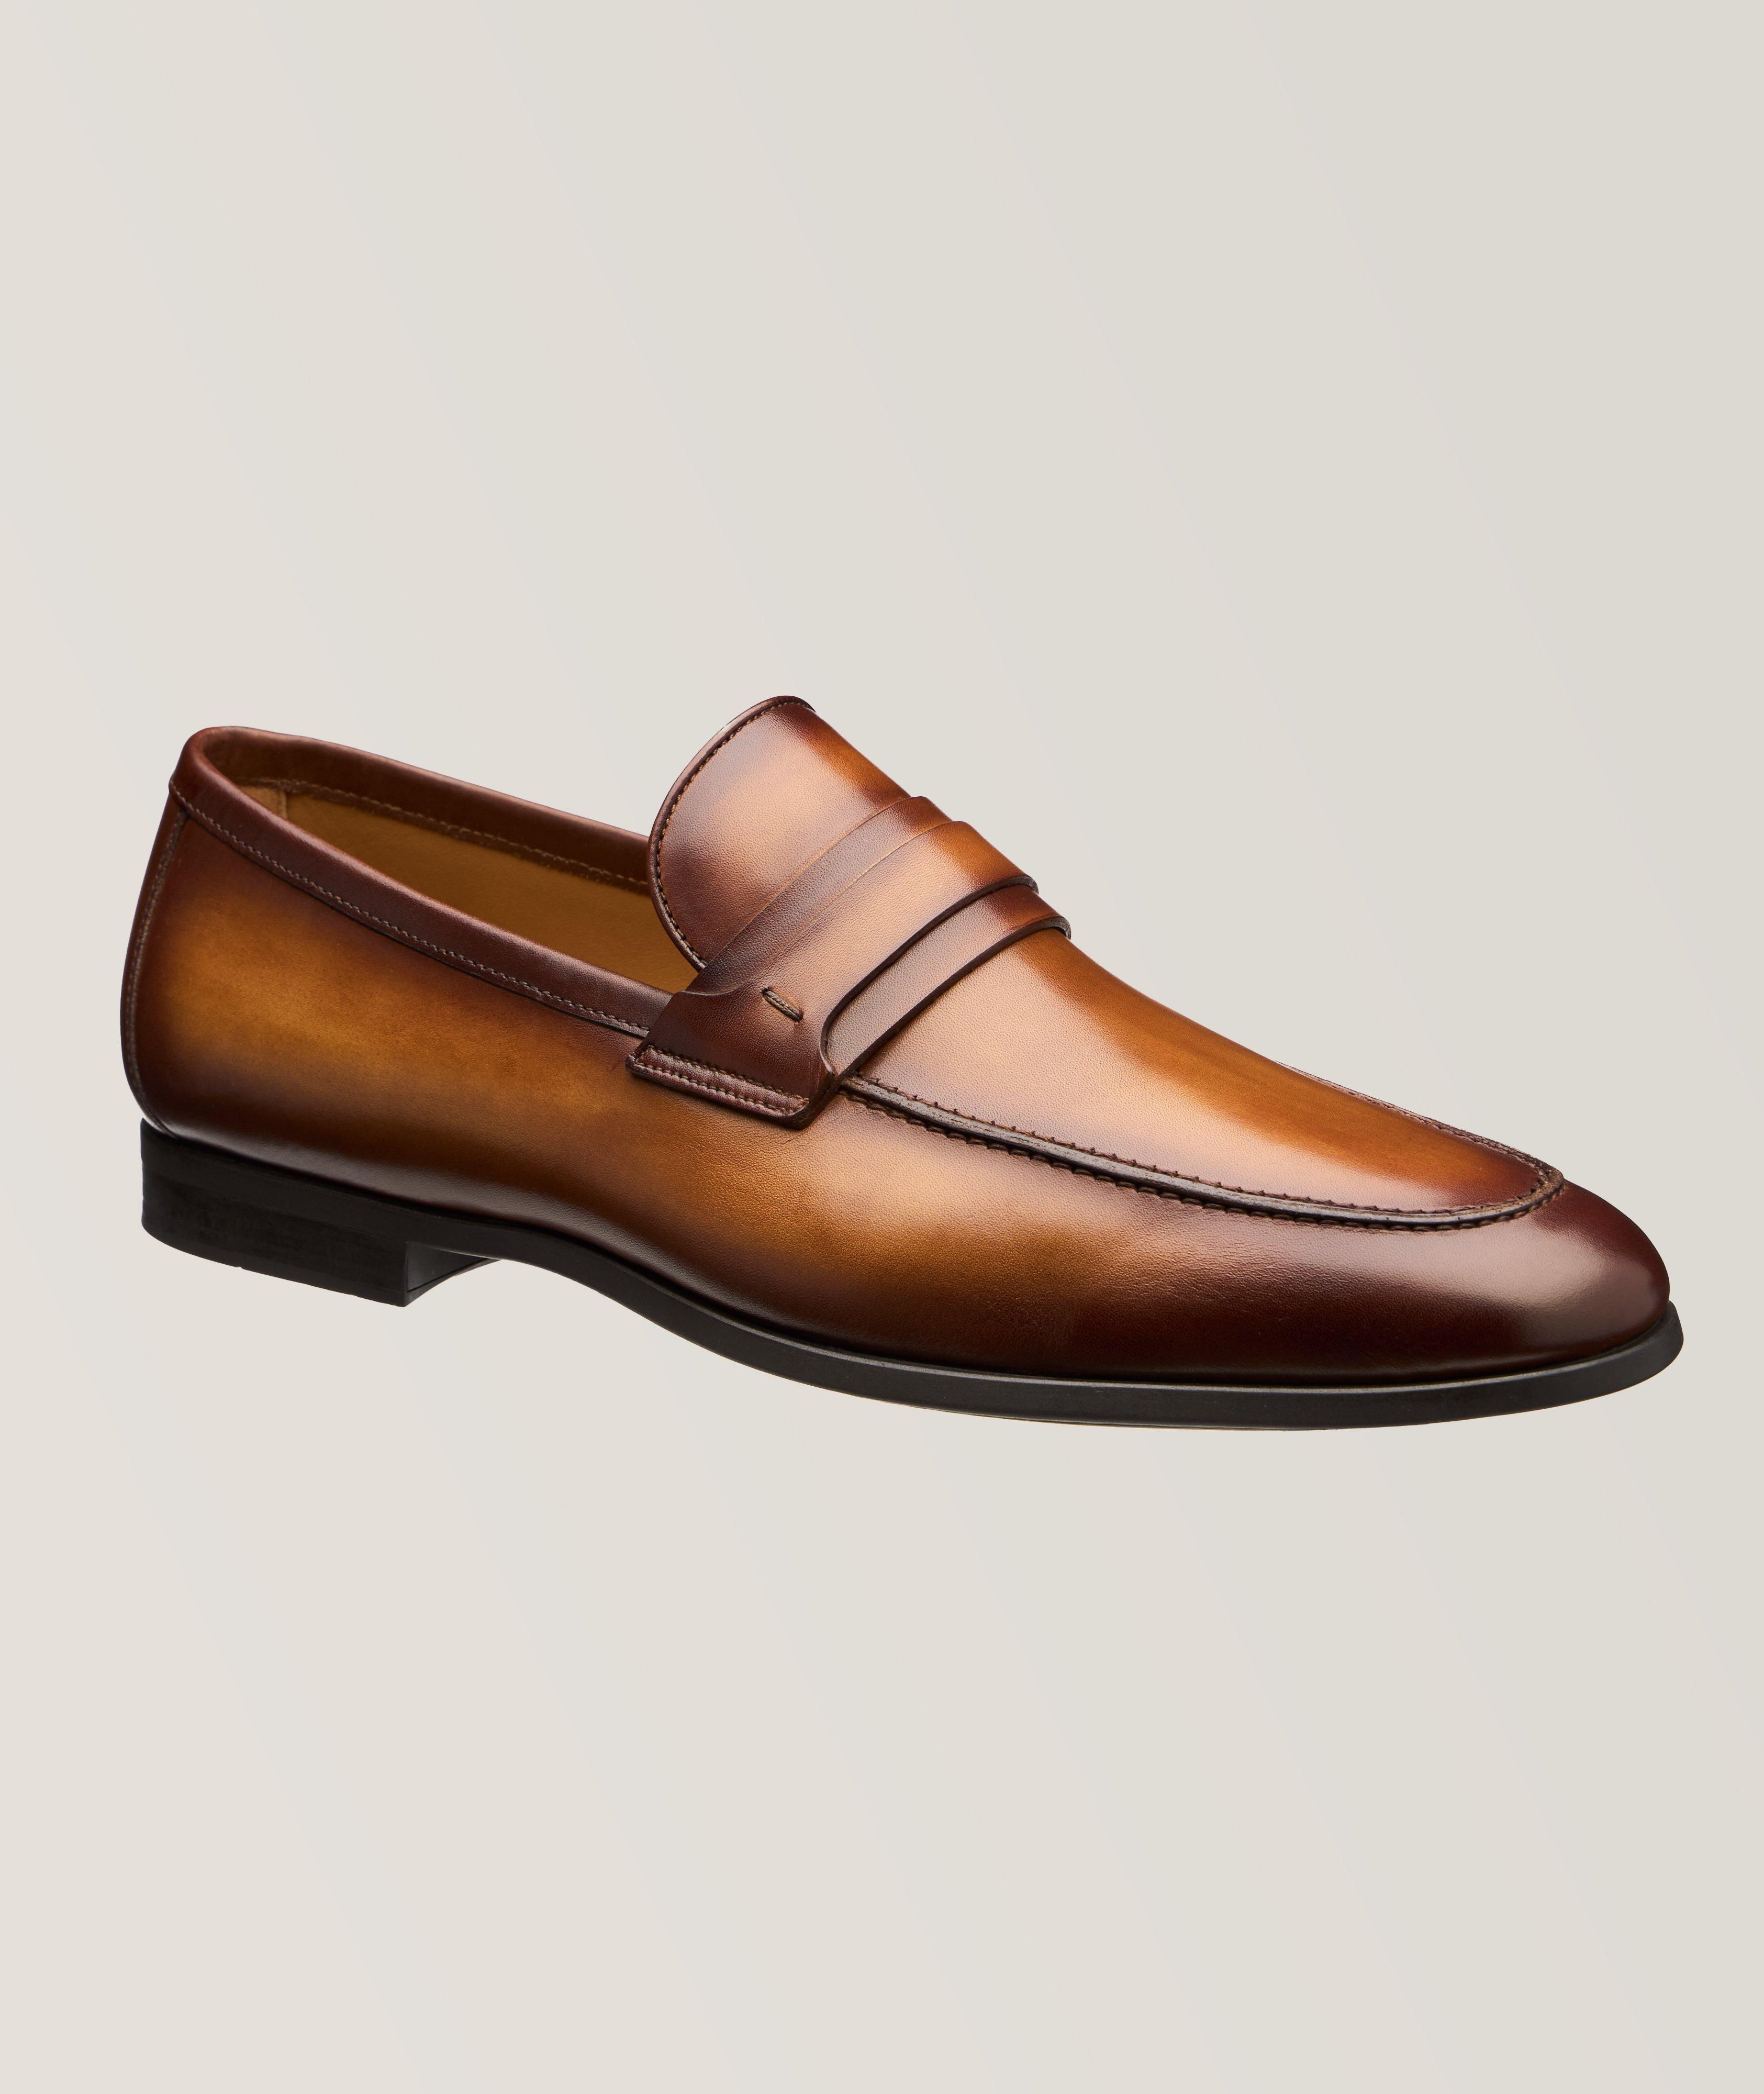 Magnanni Daniel Leather Loafers